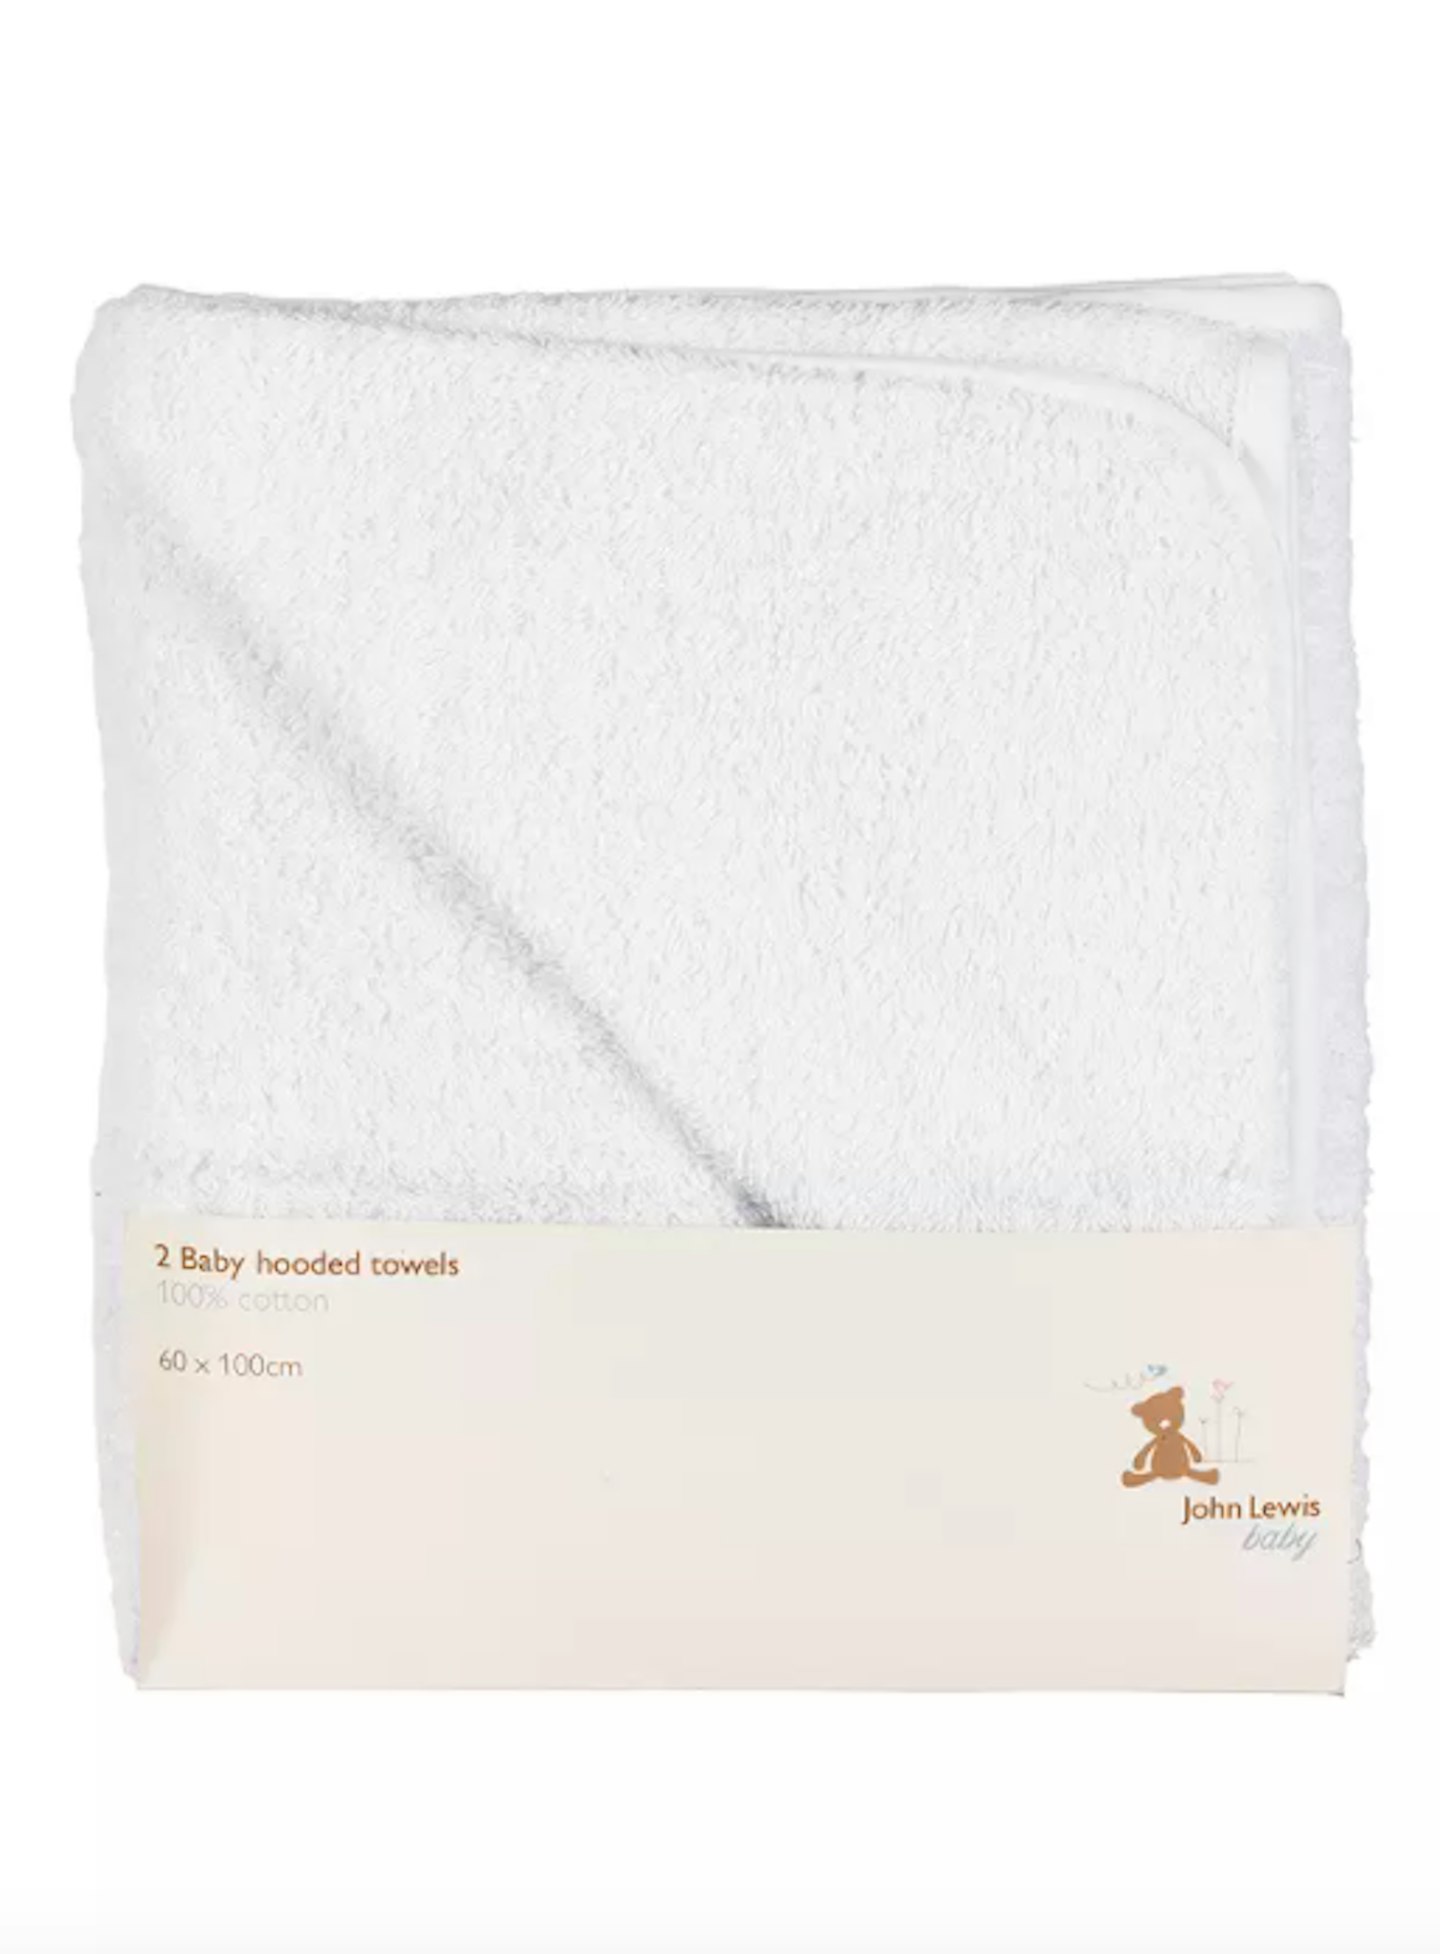 Pack of 2 Hooded Towels, £12